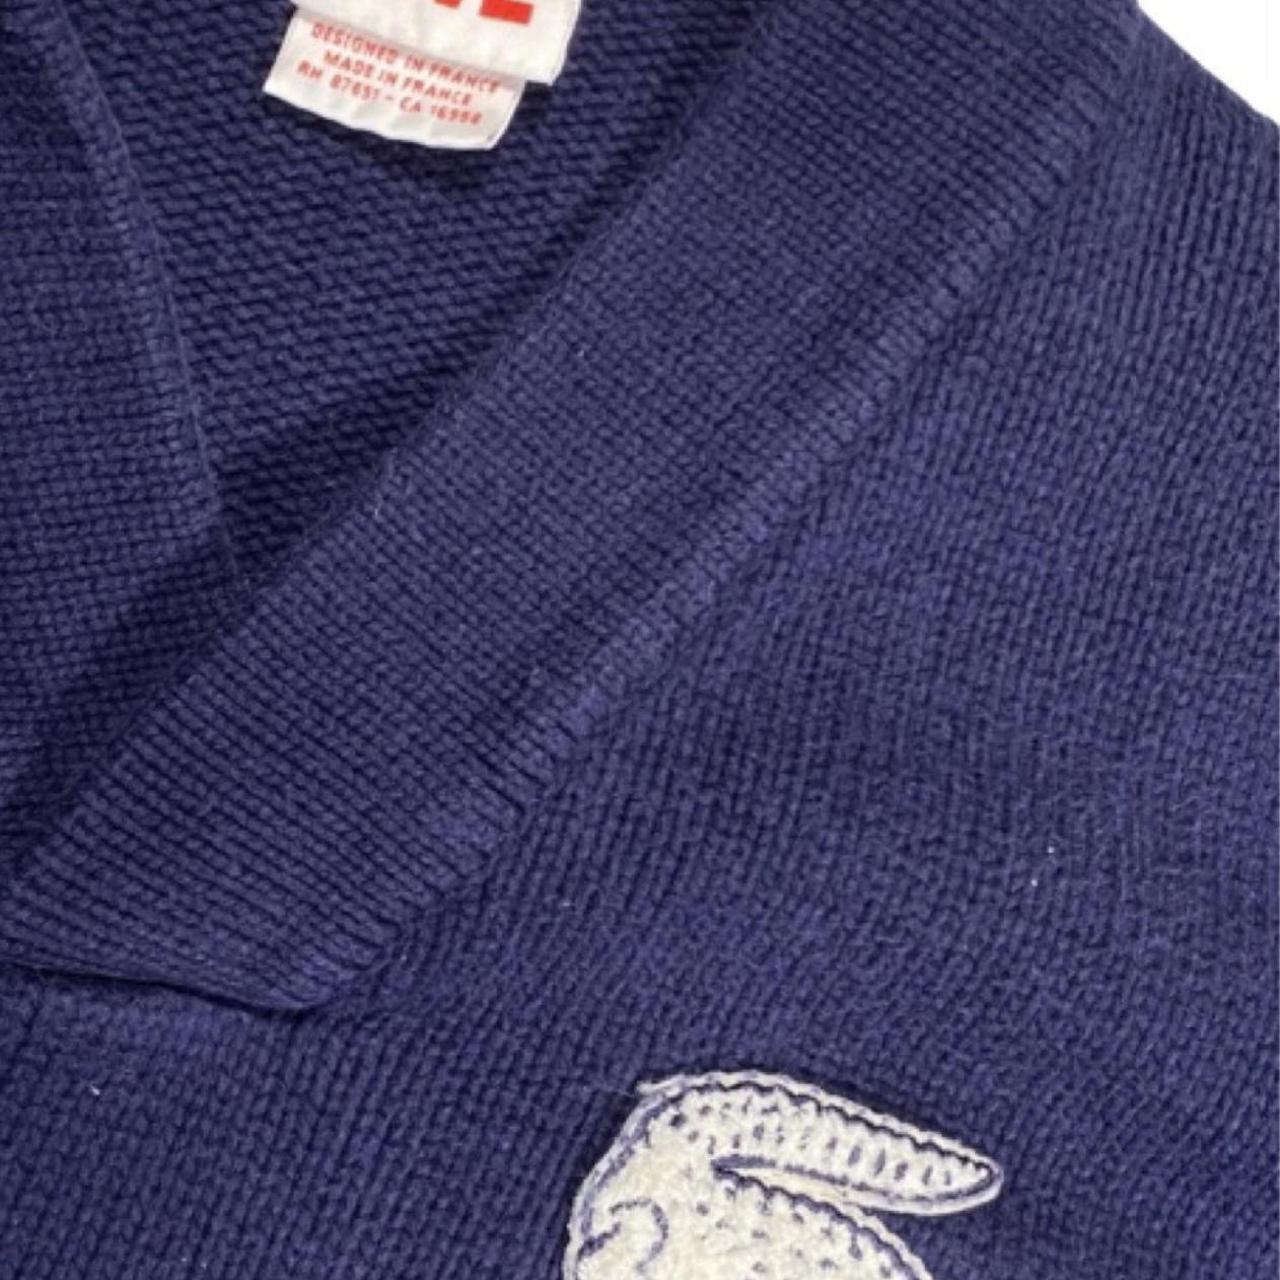 Lacoste Live Men's Blue and White Jumper (3)